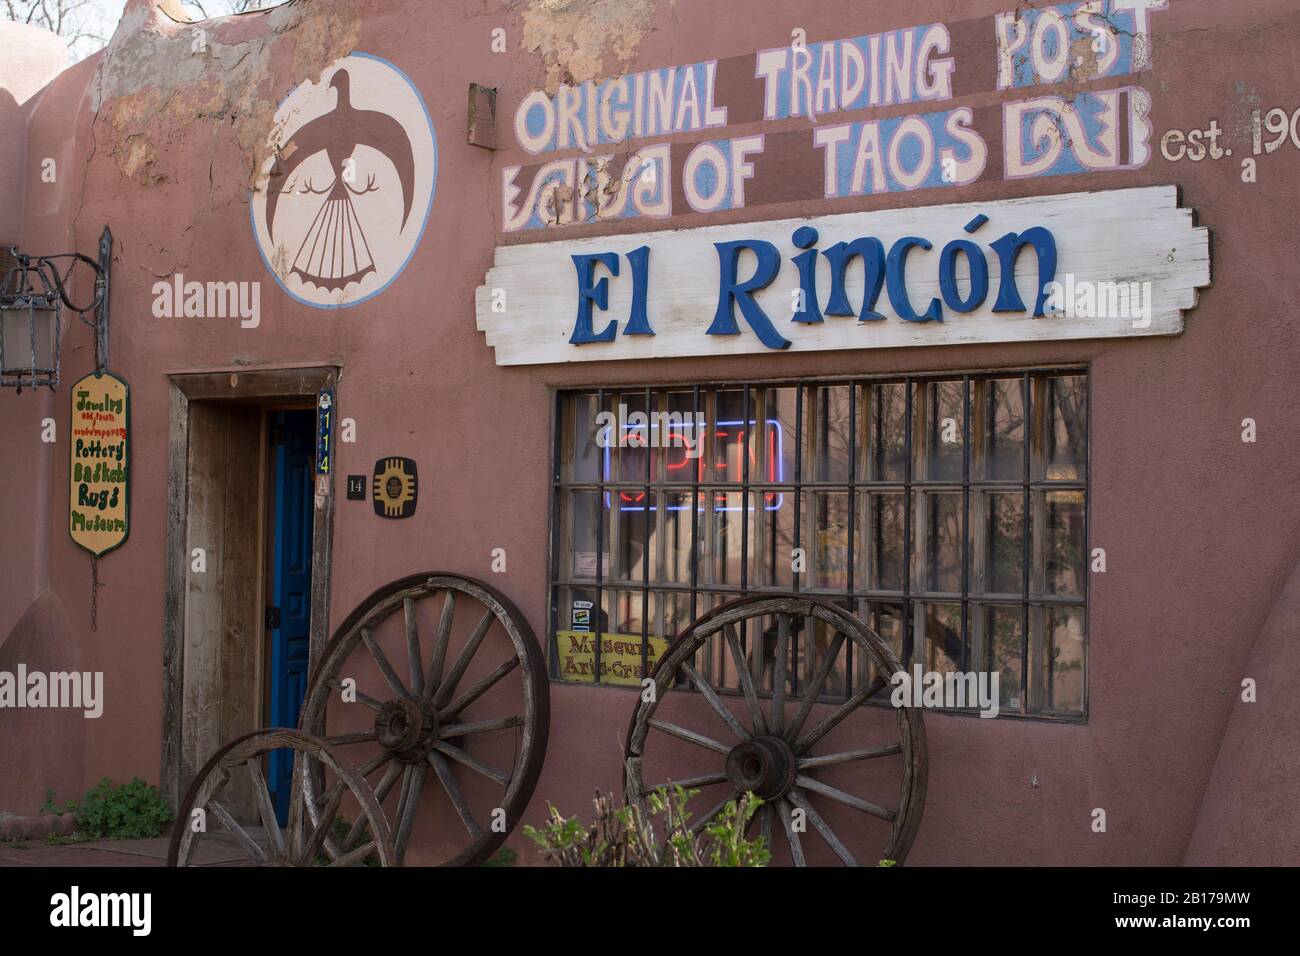 Oldest trading post in Taos since 1909. Features all types of jewelry, gifts, arts etc. Stock Photo